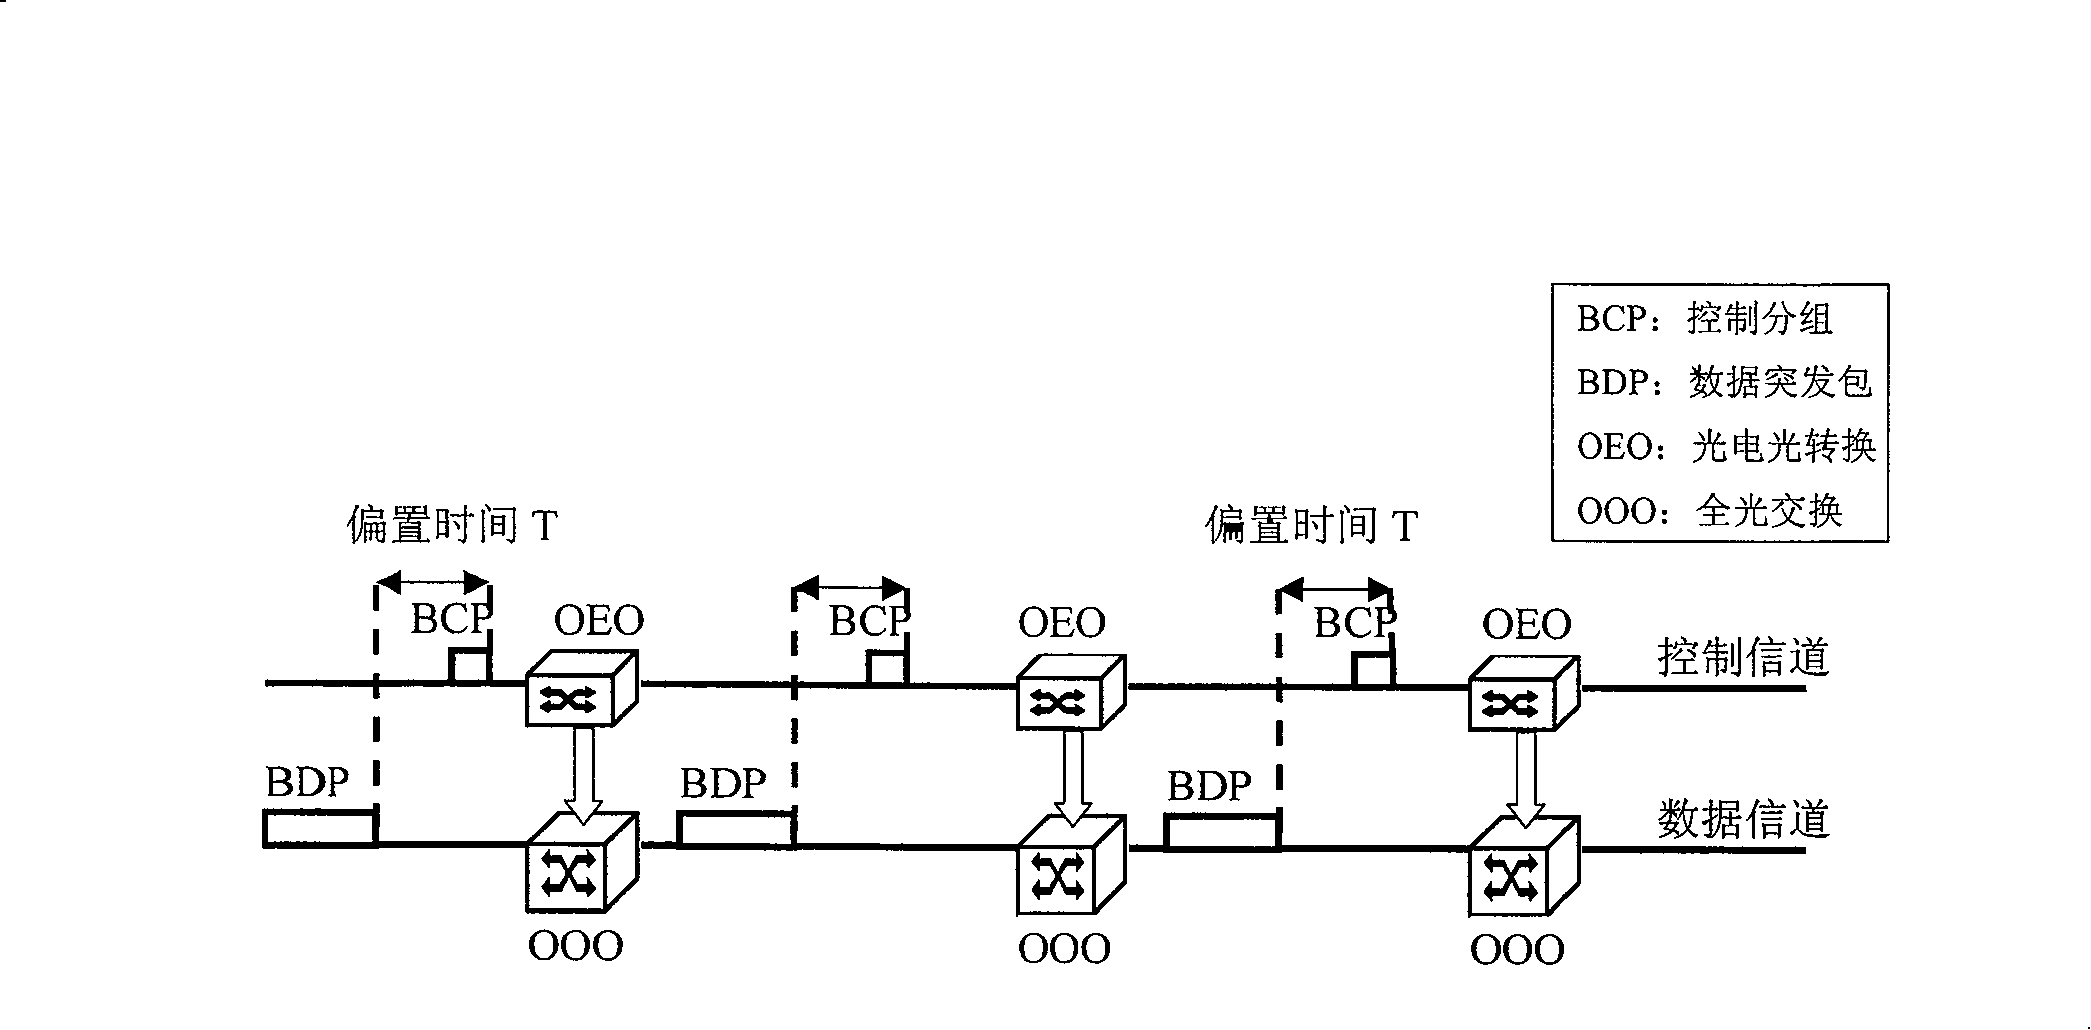 Network configuration for loading high-speed data business and trans mitting method